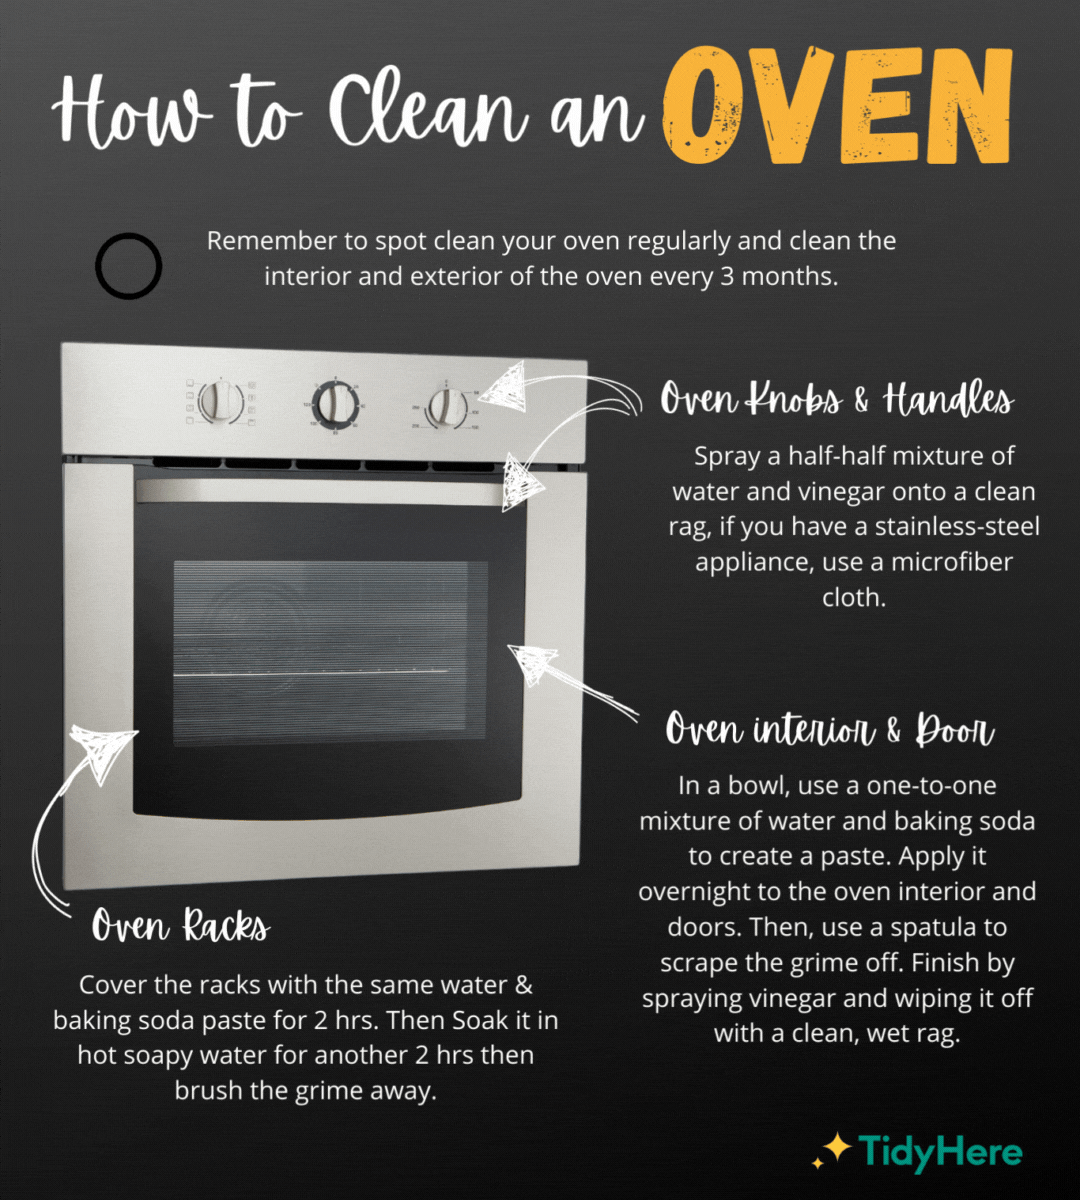 How to Clean an Oven Tidyhere Infographic